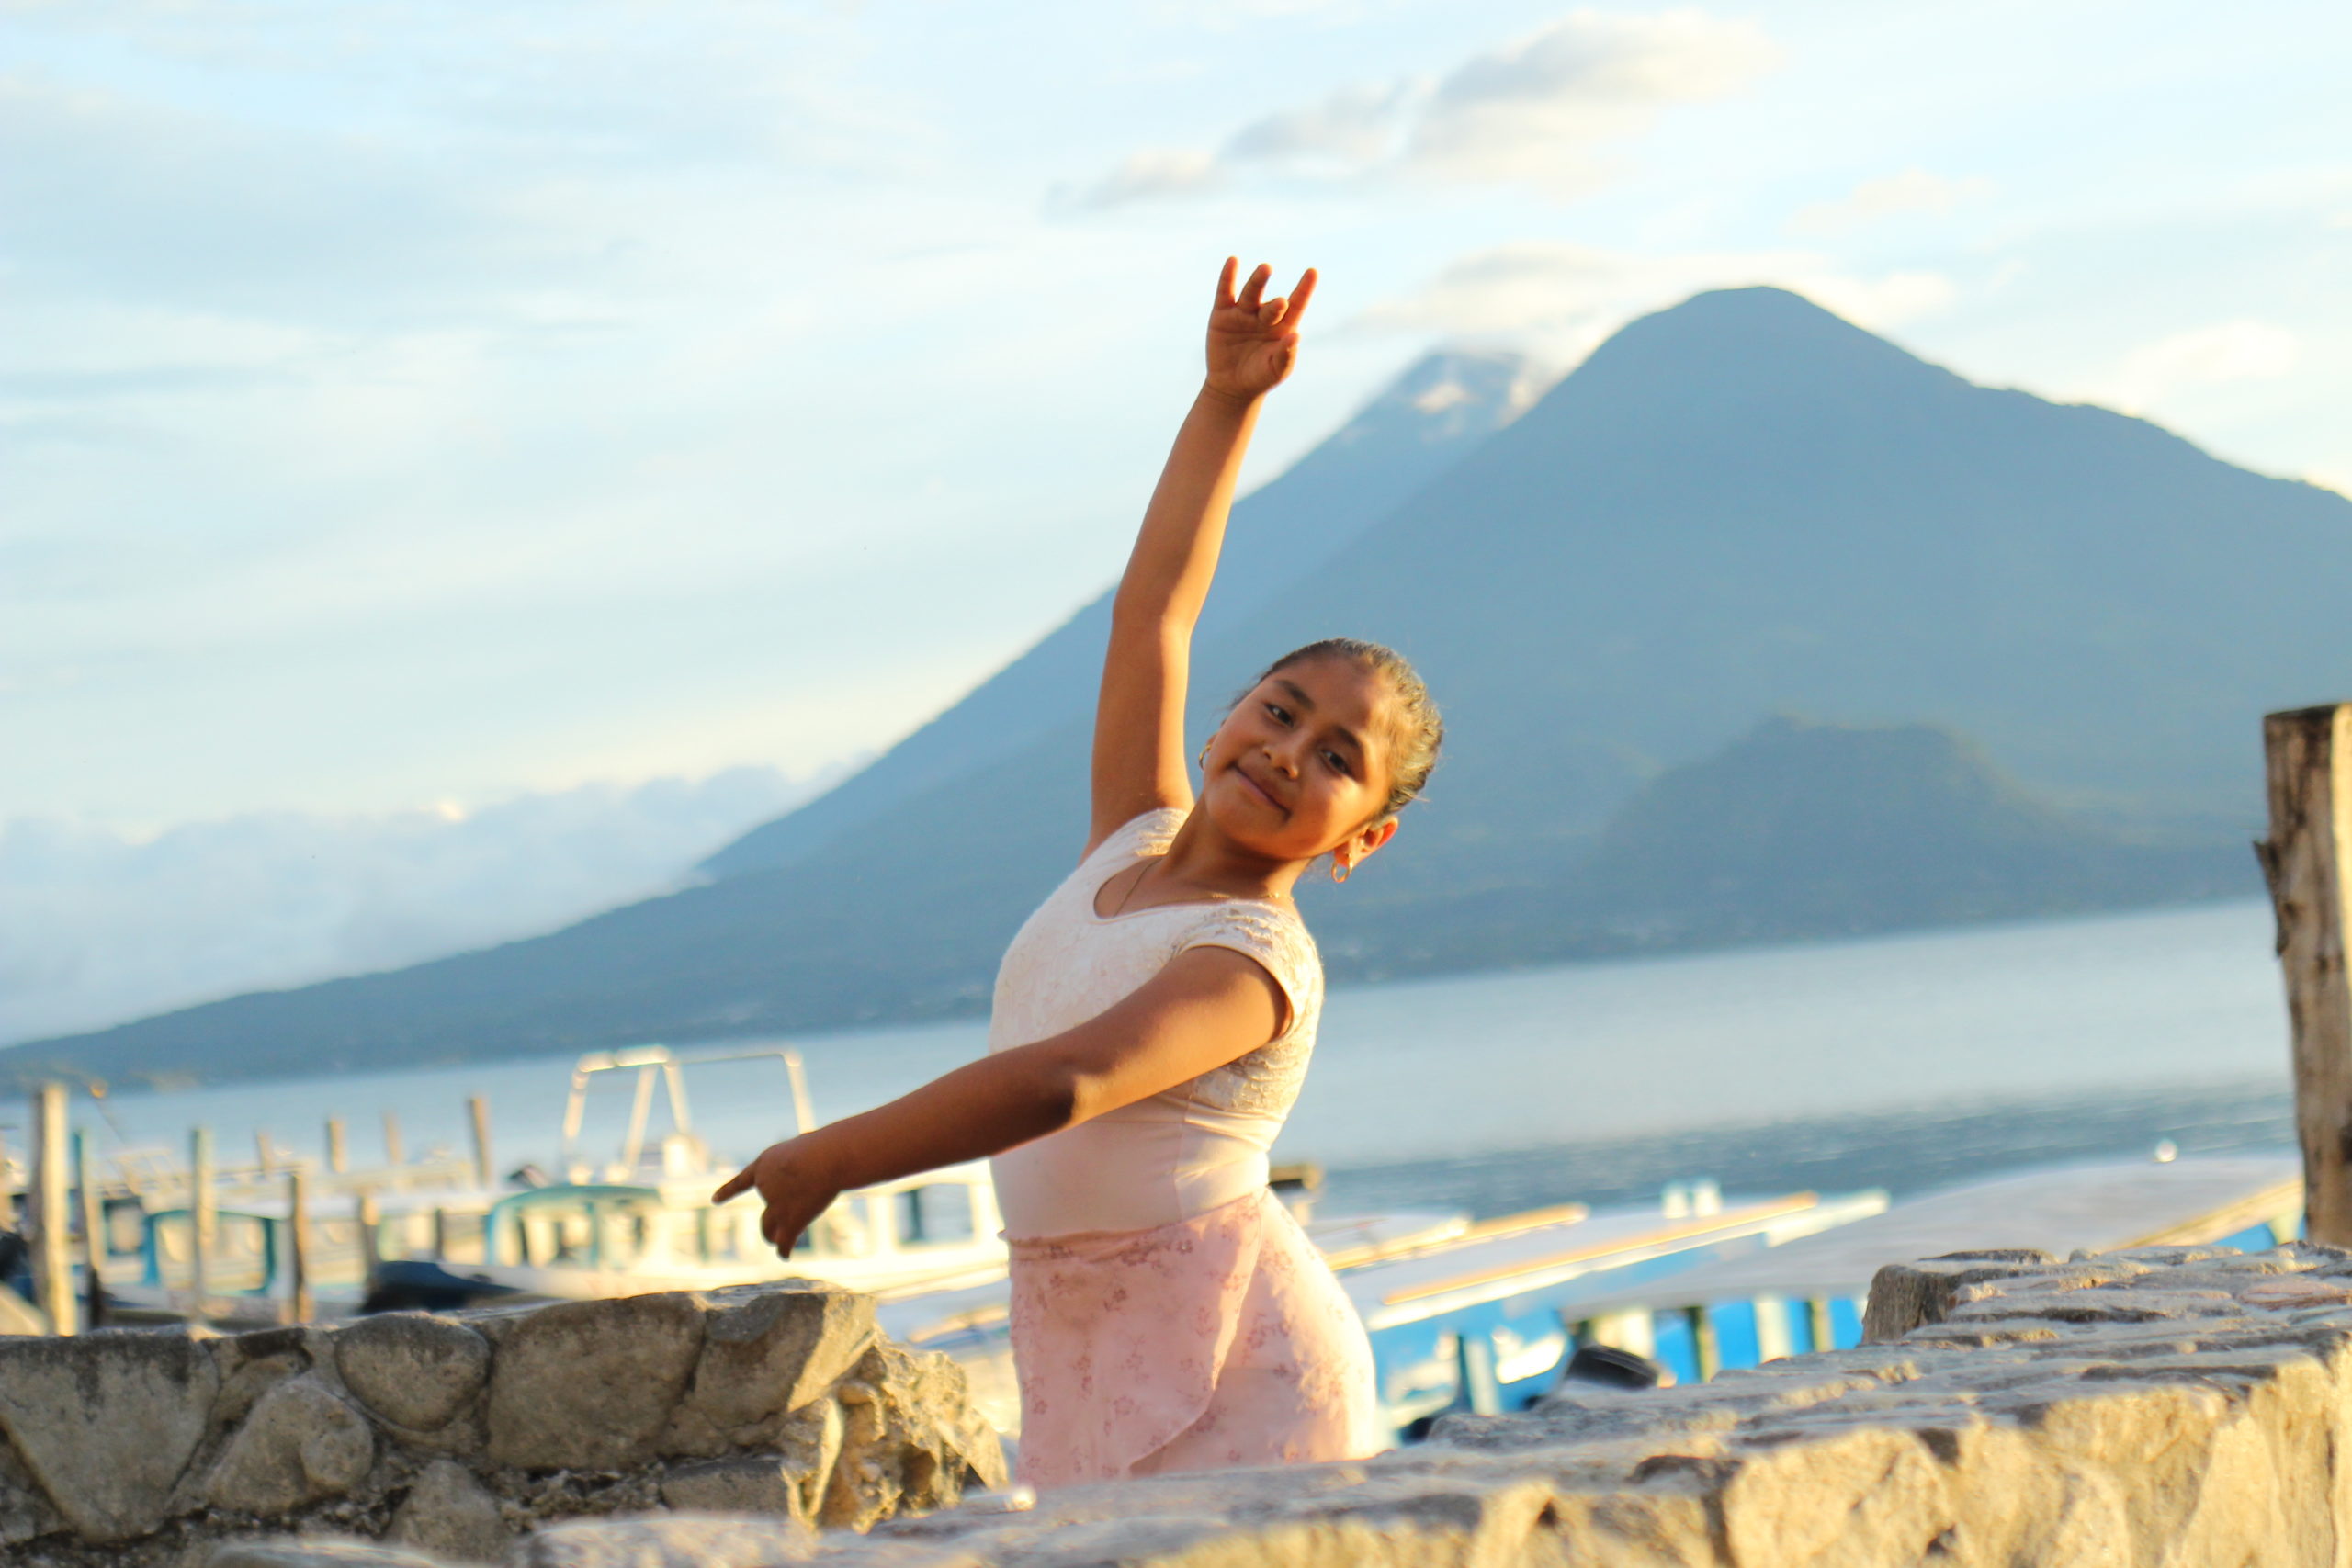 Image of a young ballerina standing outdoors in fourth position with a river and mountains behind her